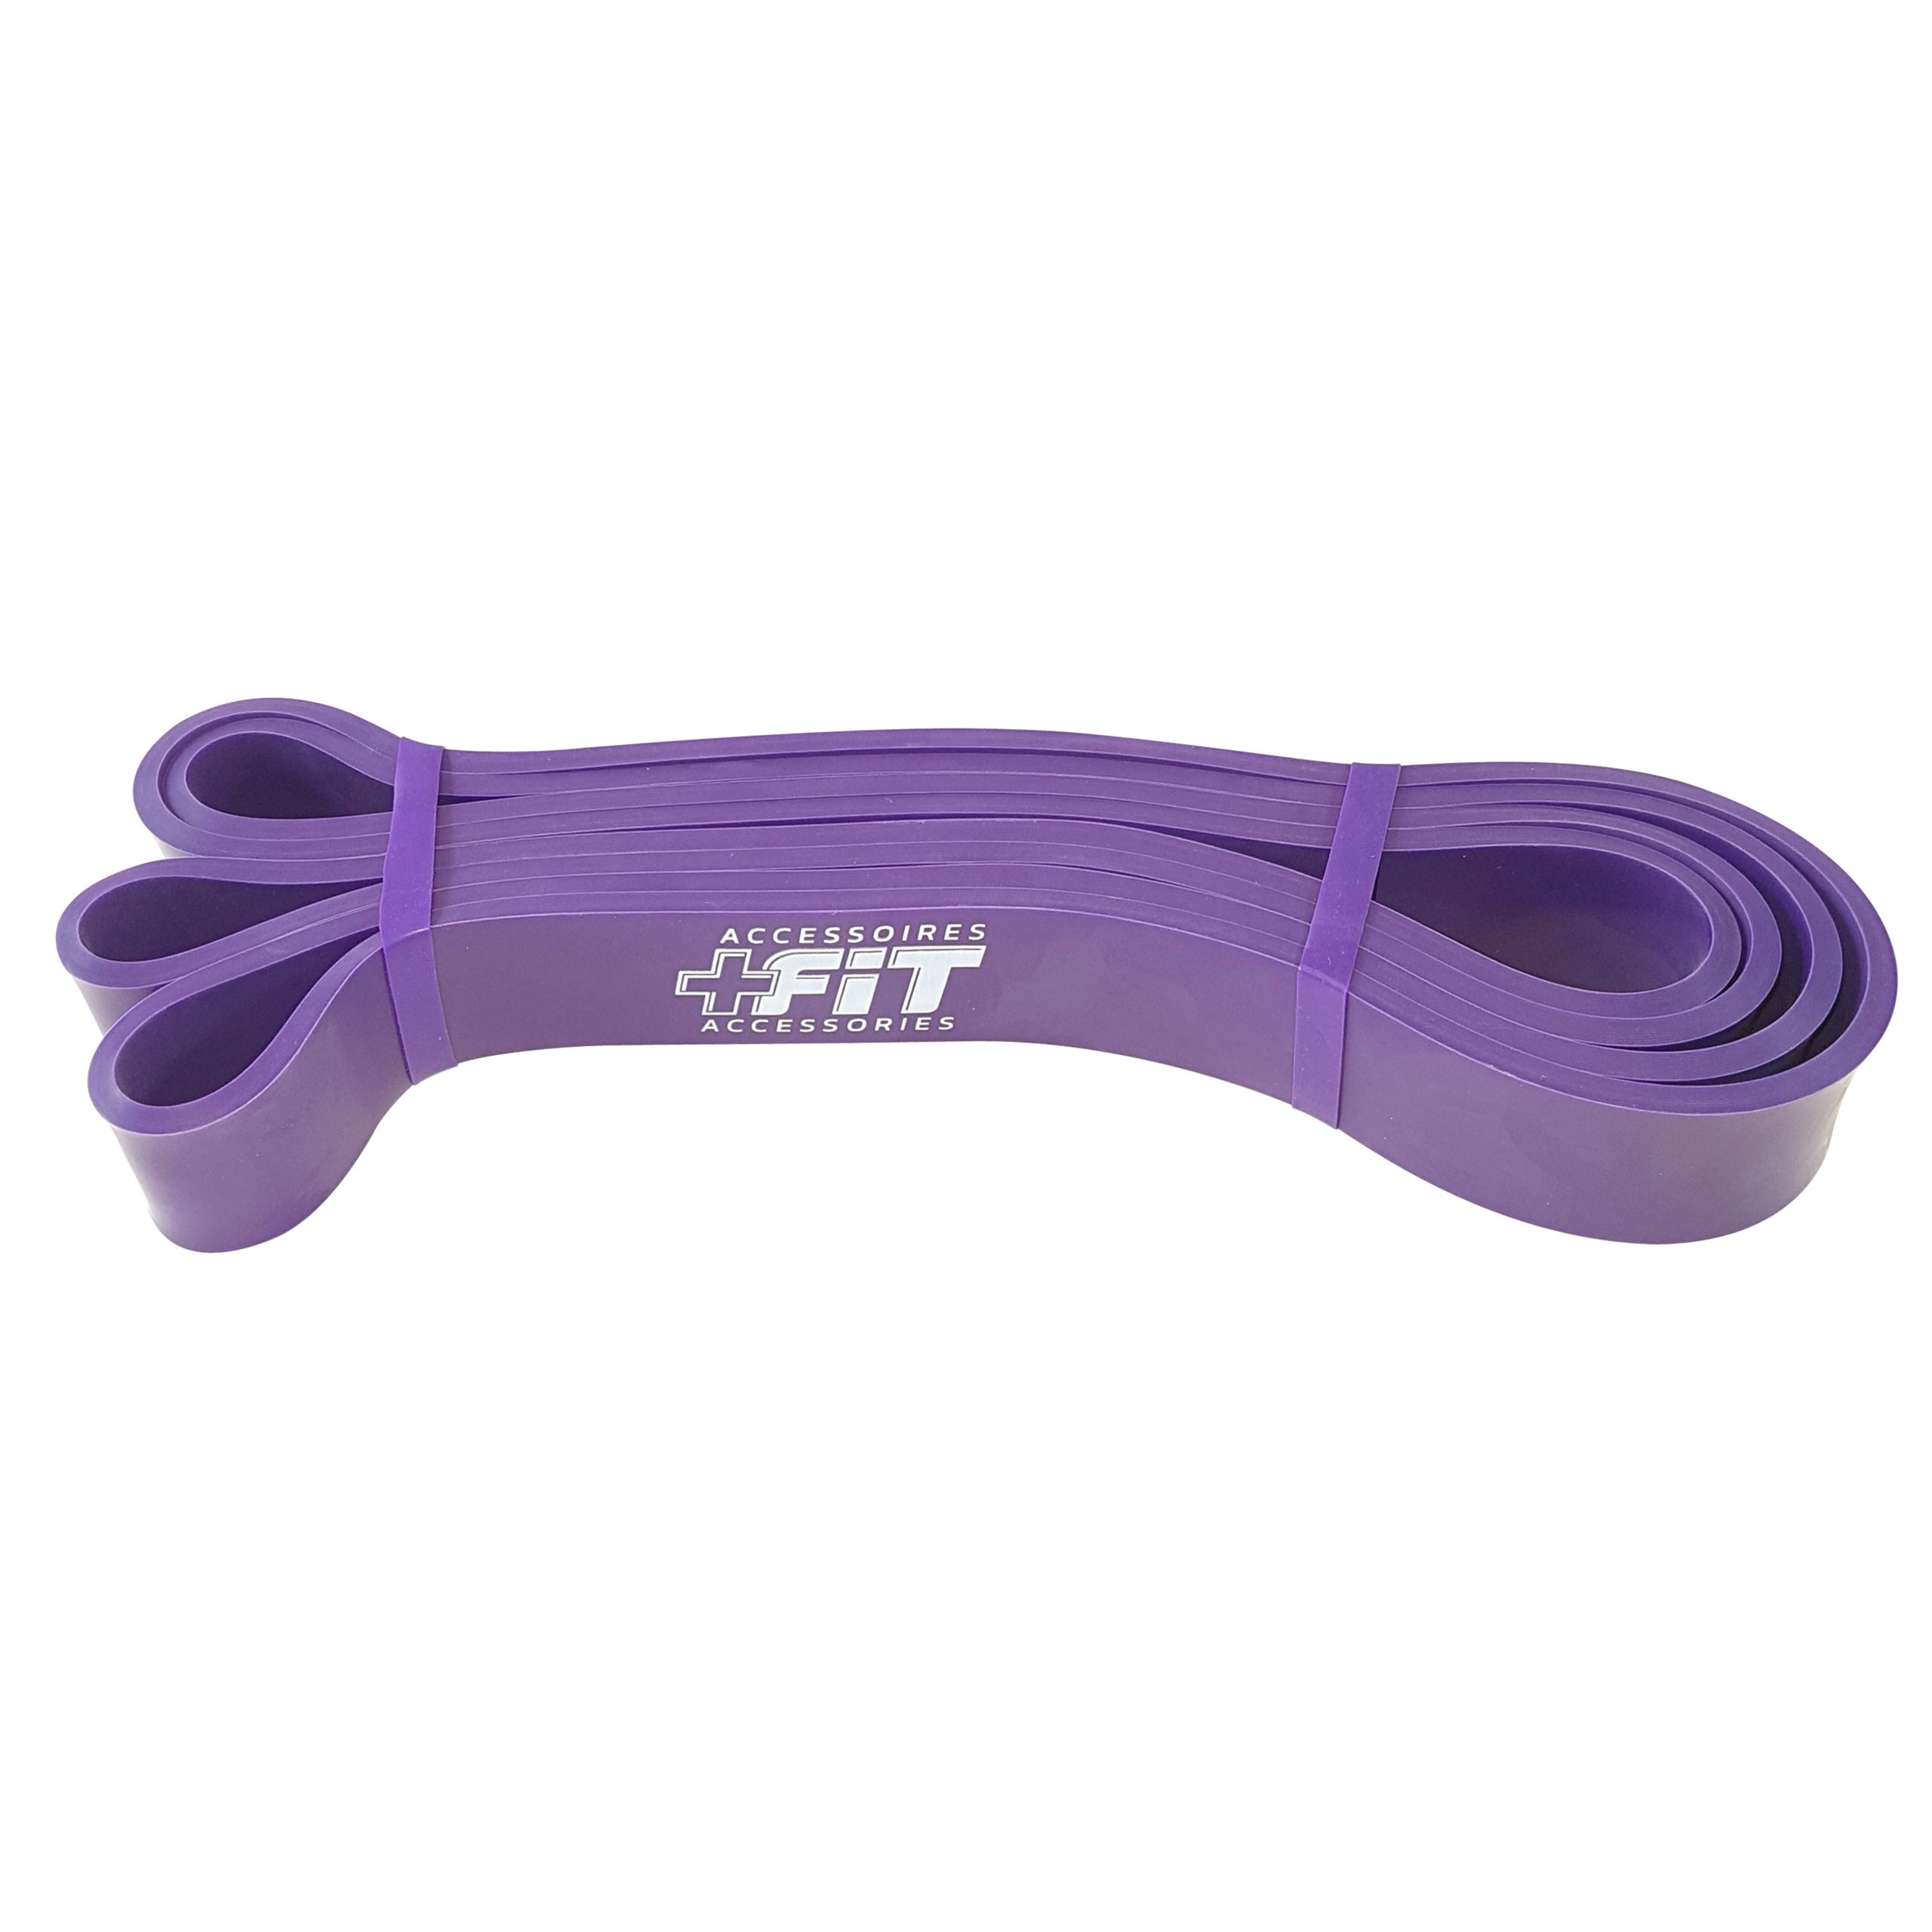 LONG LOOP RESISTANCE BANDS (1 Band) Fitness Accessories Purple 25-80lbs (1 1/8") Top Nutrition and Fitness